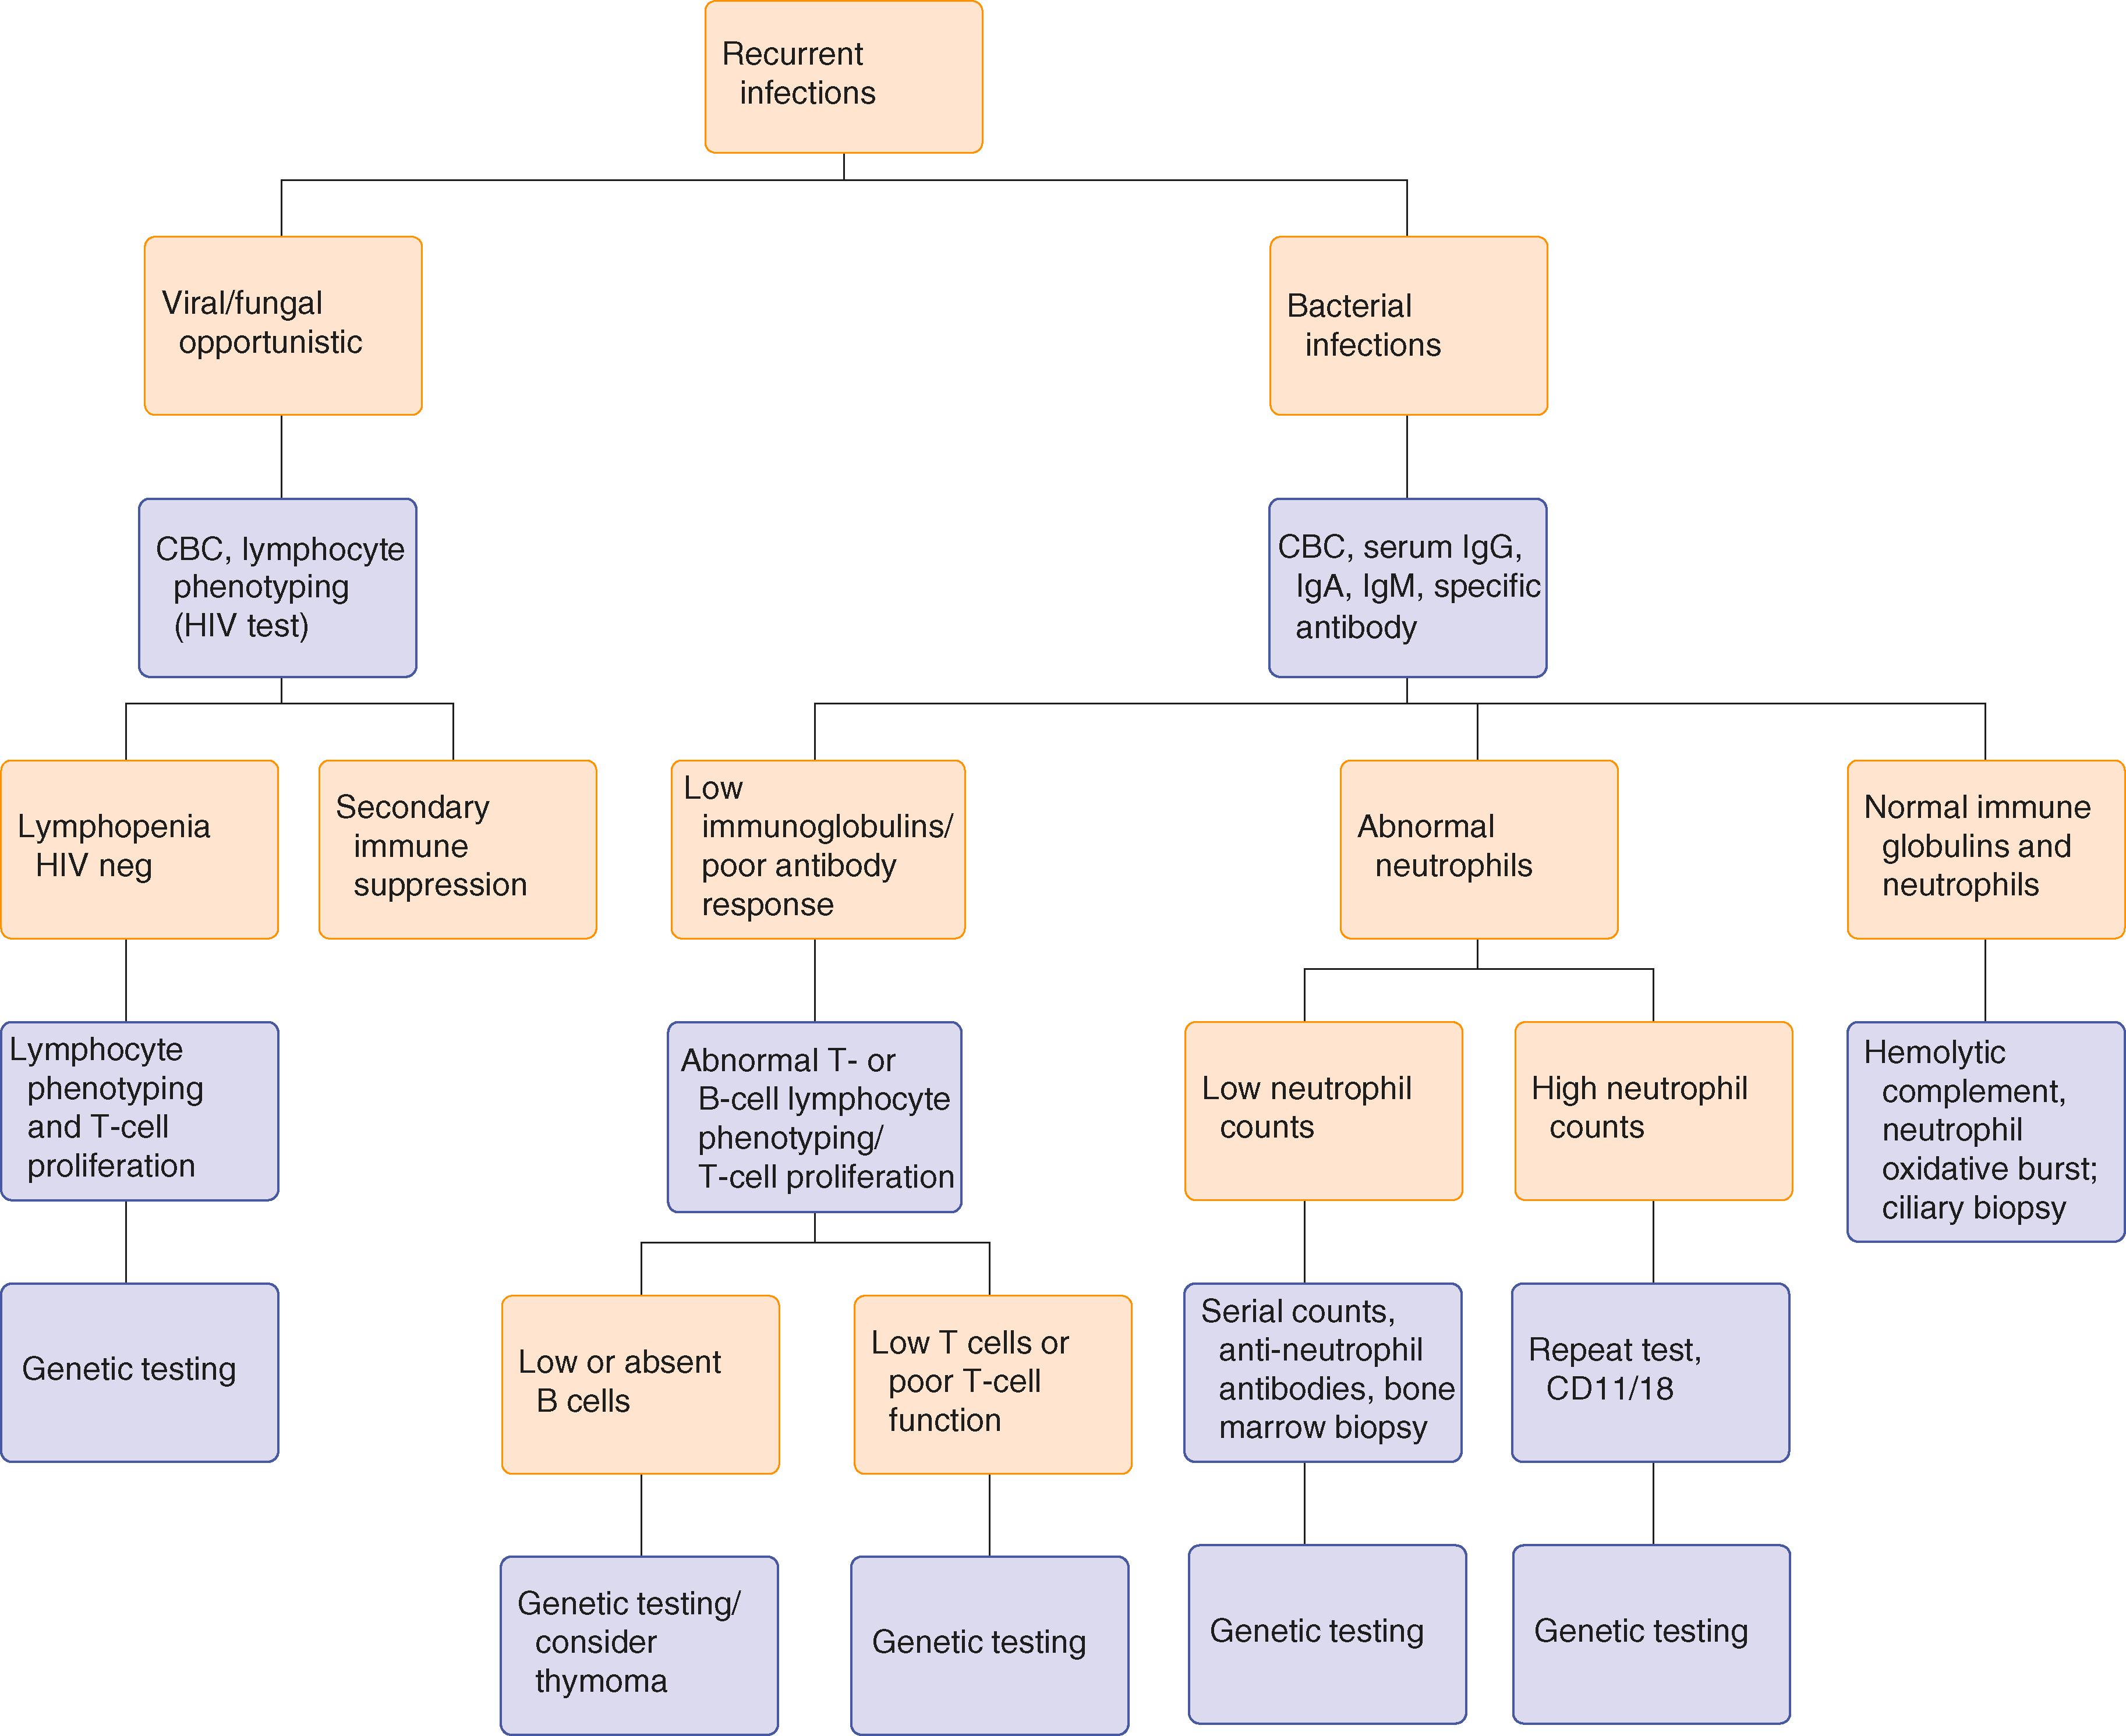 FIGURE 231-1, Evaluation of immune defects presenting with recurrent infections. CBC = complete blood count; HIV = human immunodeficiency virus; Ig = immunoglobulin.